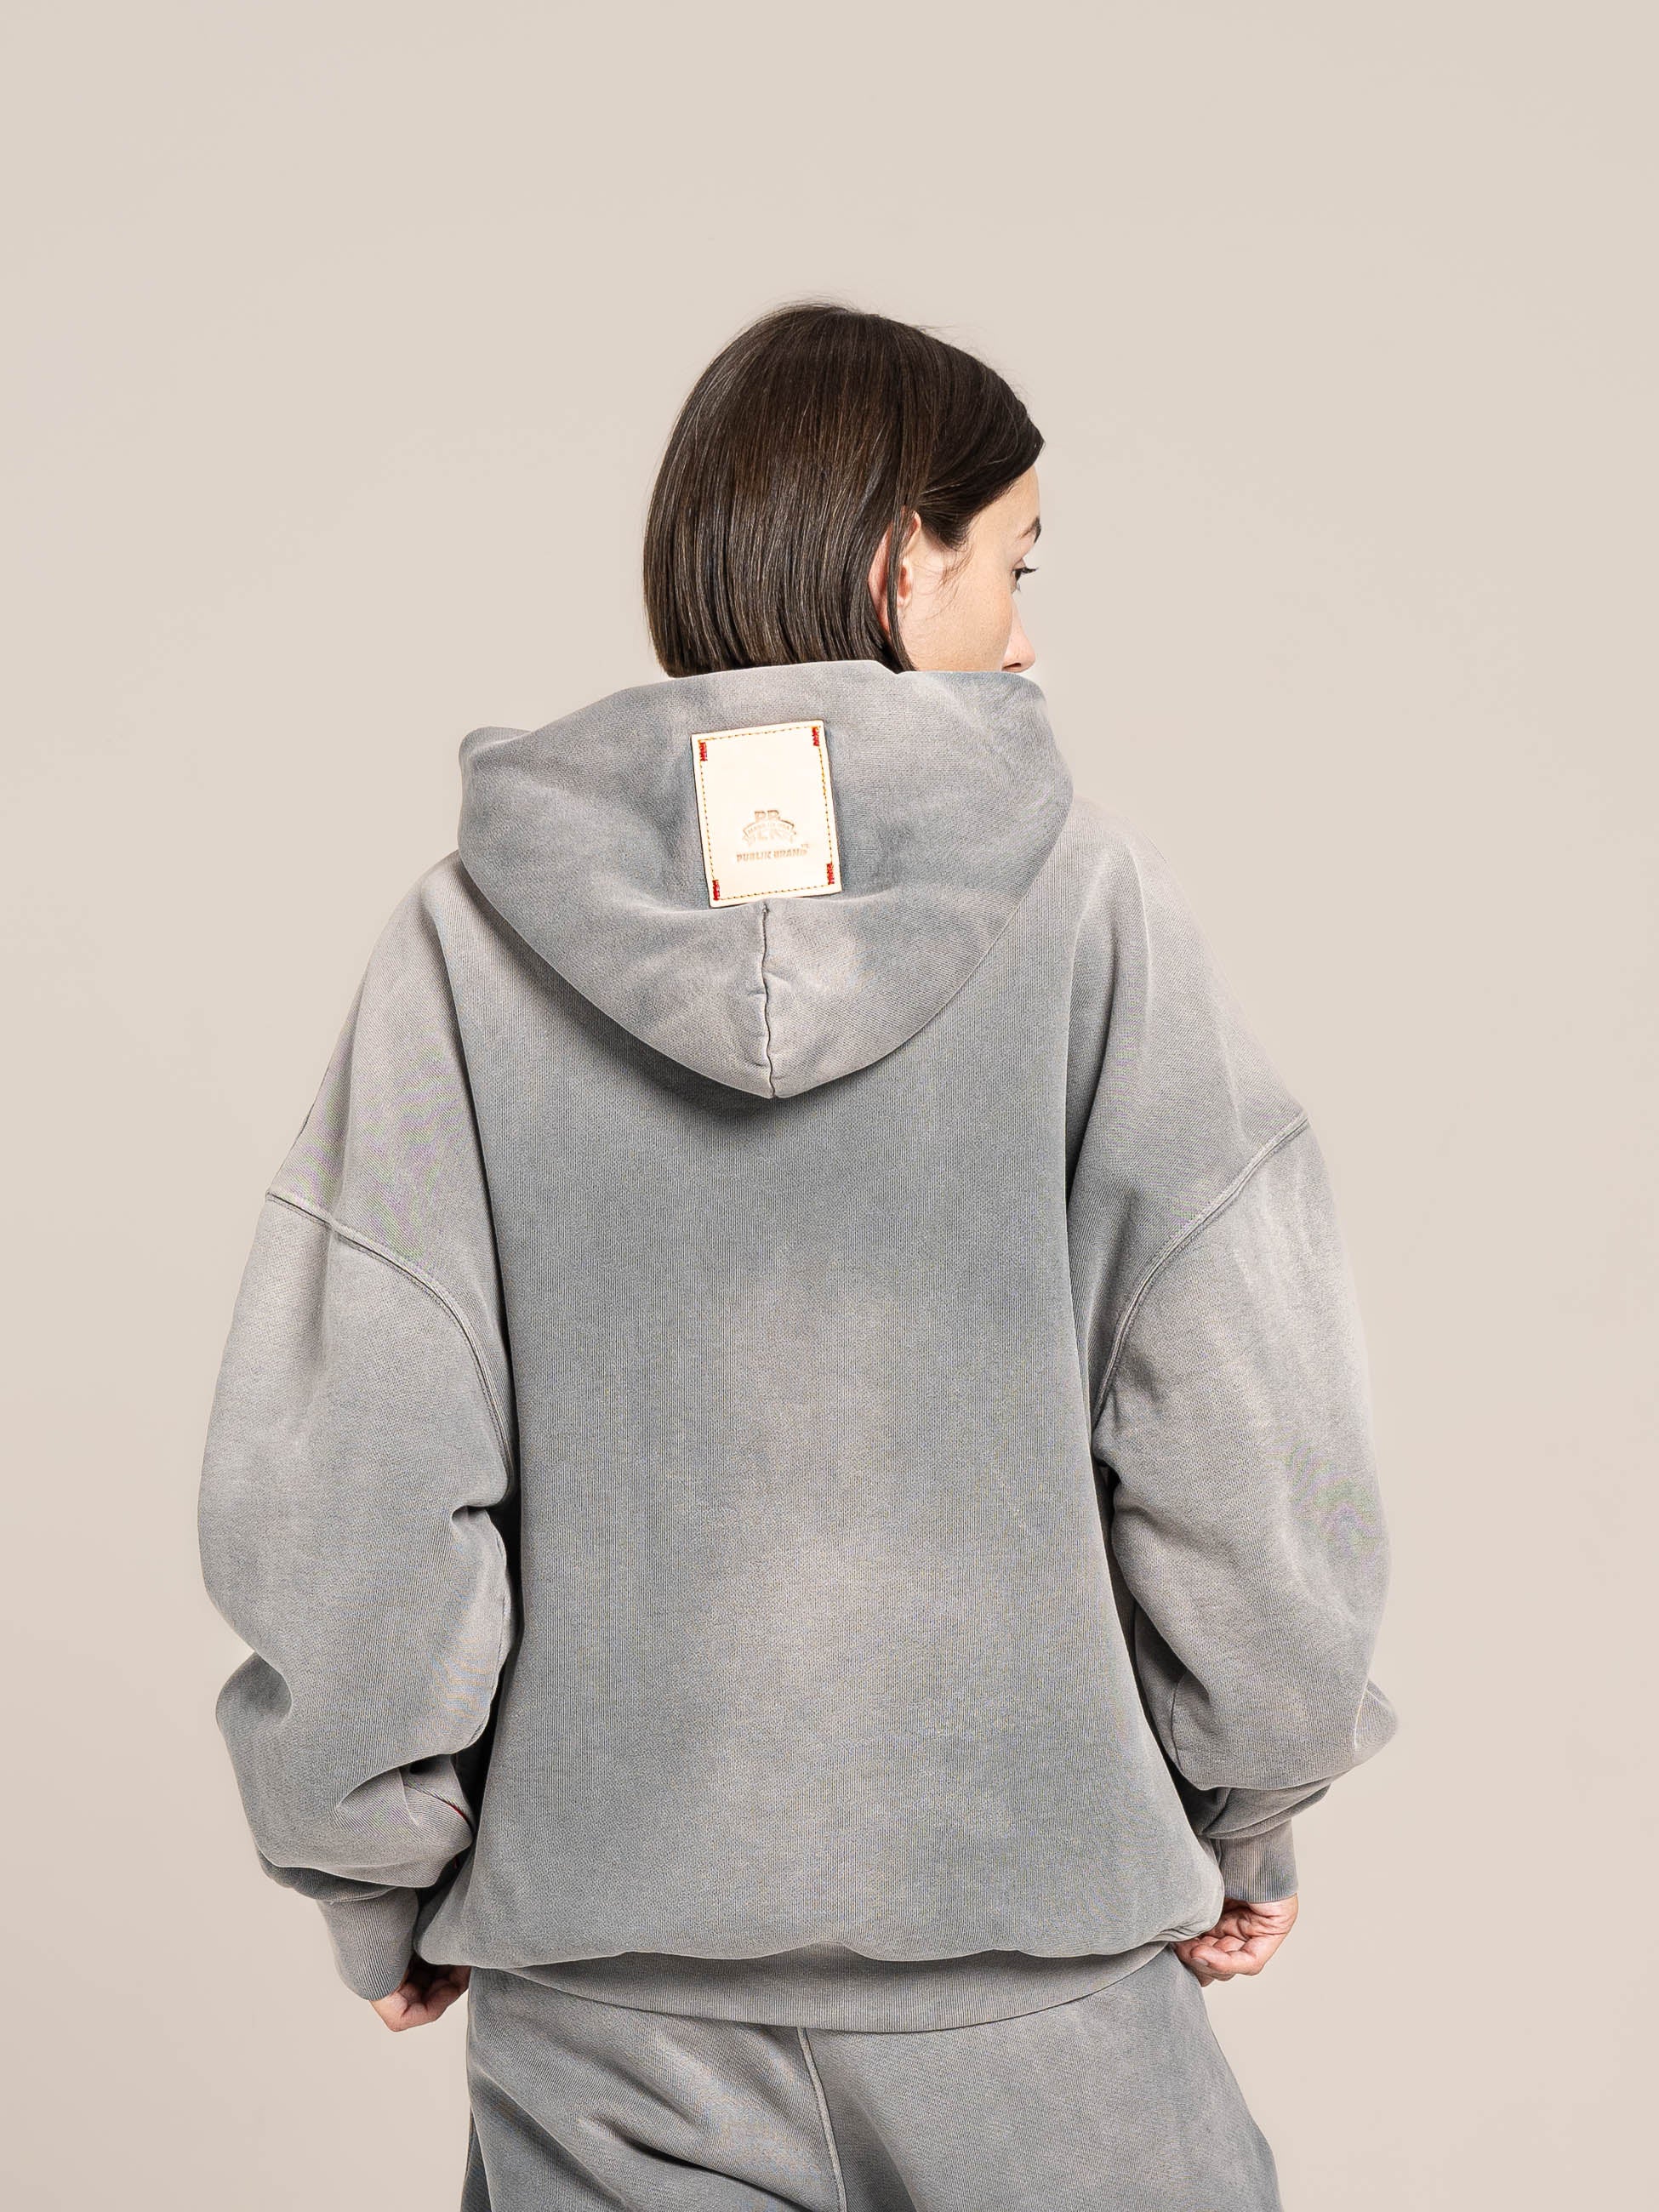 Female model shows a detail of the double layered fleece ash blue hoodie back side